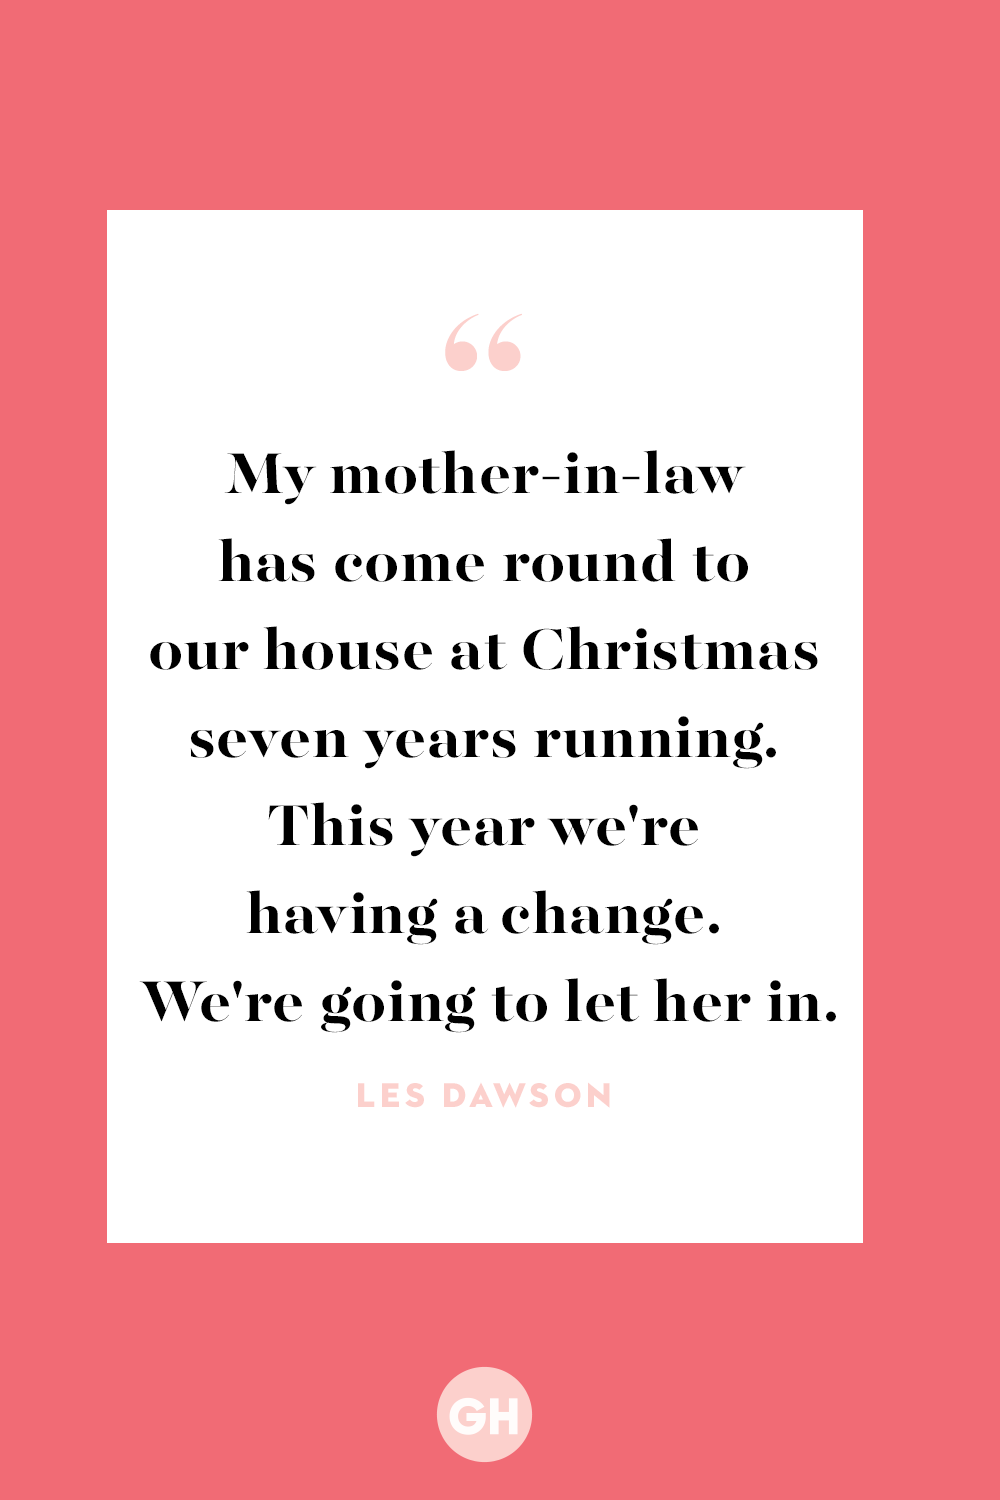 30 Best Mother-in-Law Quotes and Sayings image pic